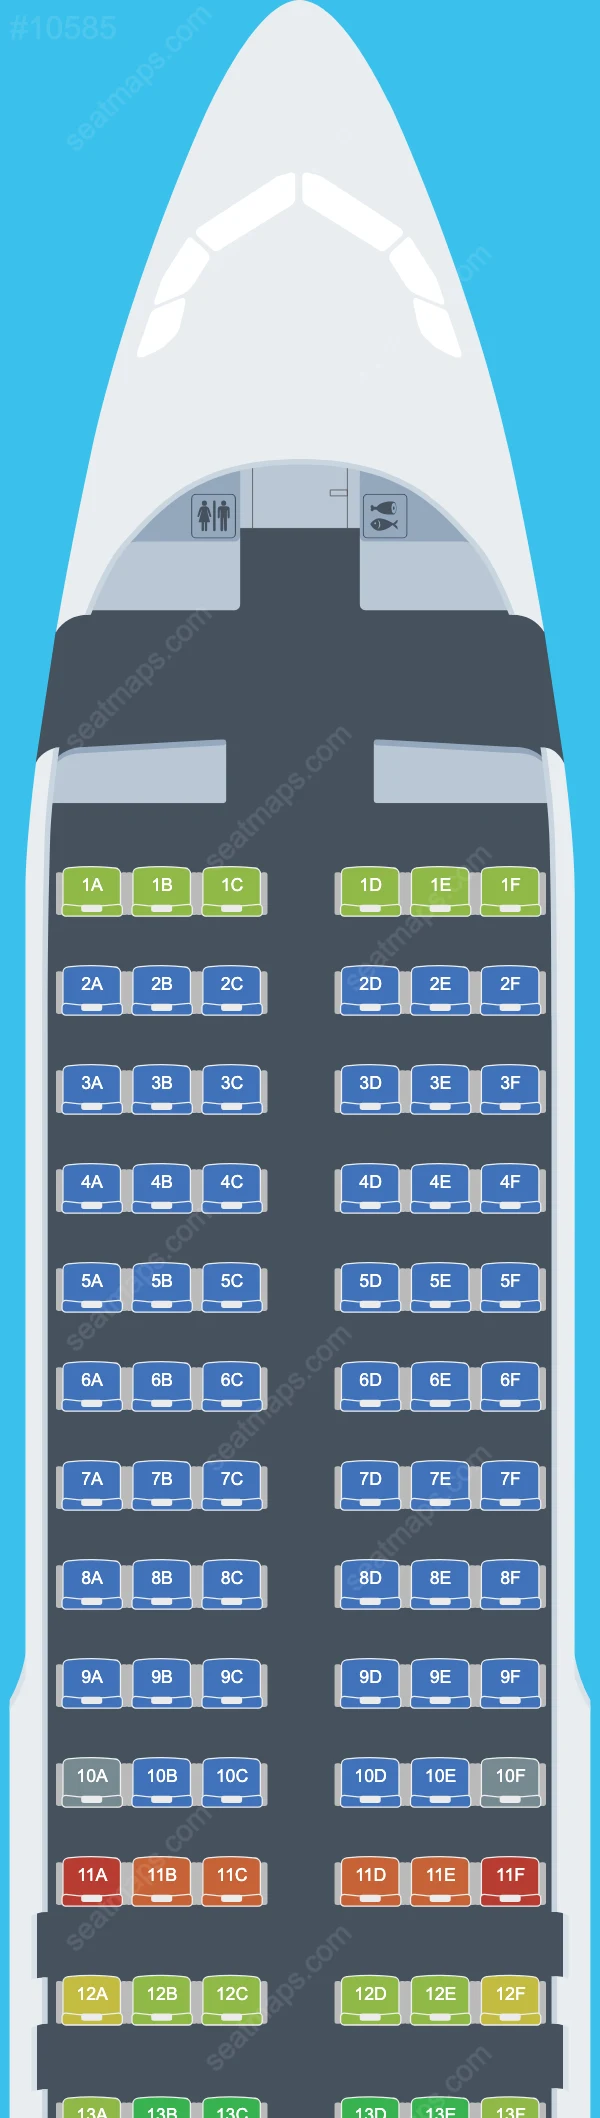 Heston Airlines Airbus A320 Seat Maps A320-200